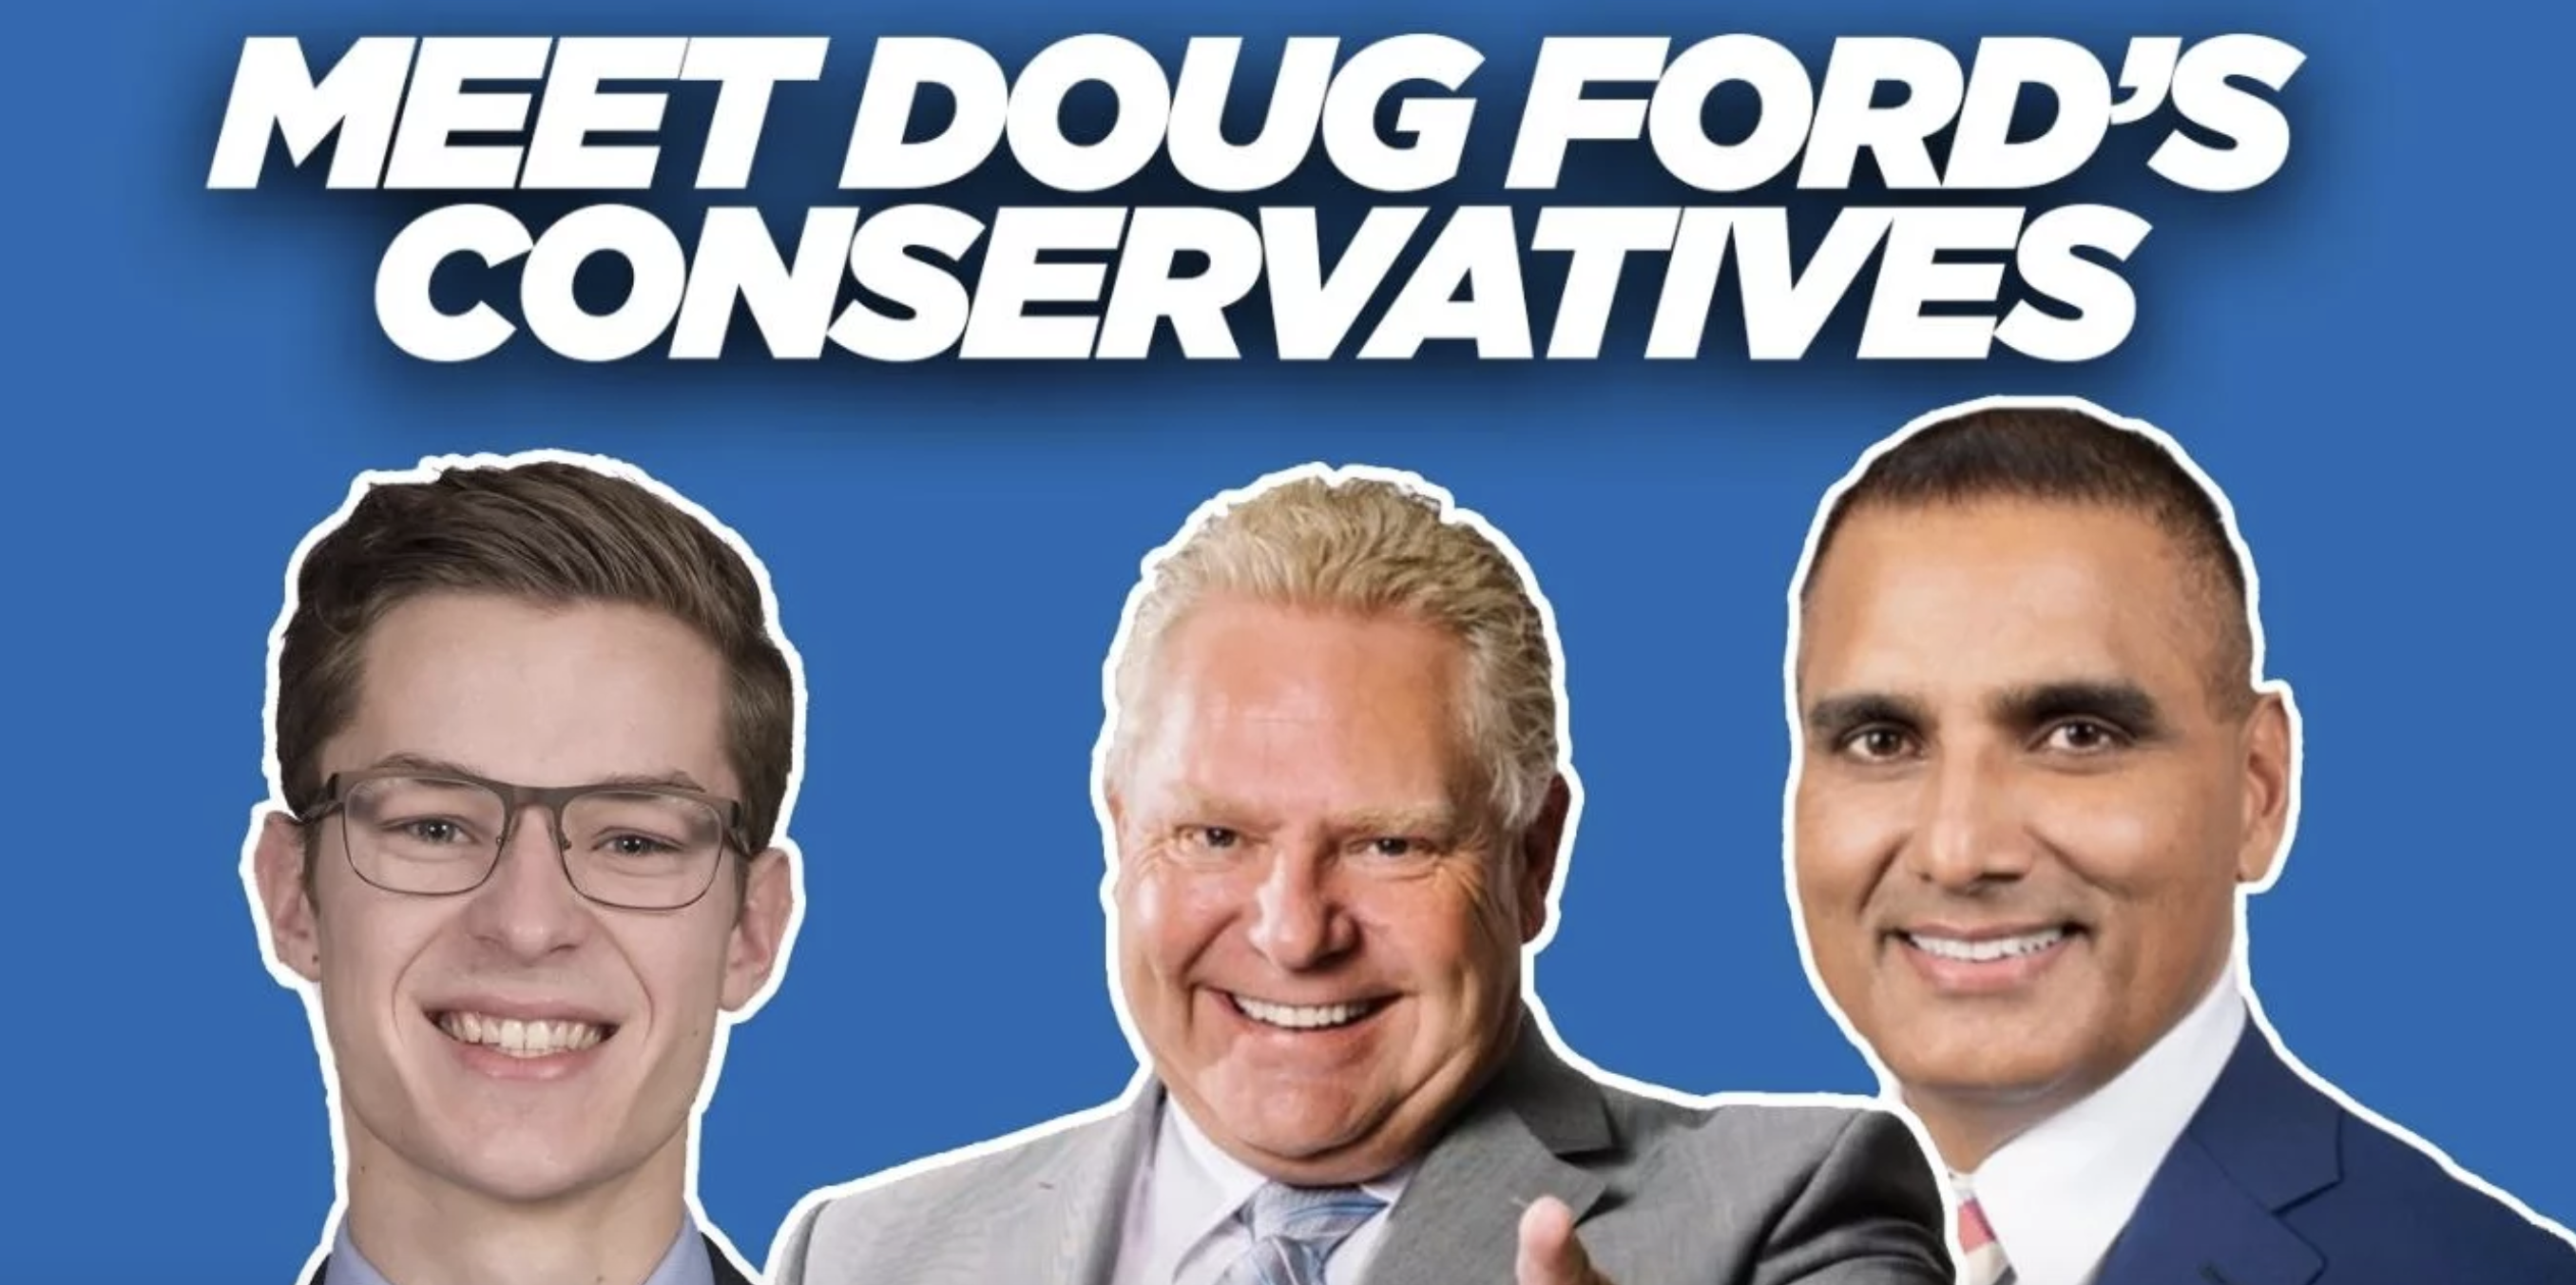 After dropping candidates, Liberals target PCs for comments against abortion, gay marriage